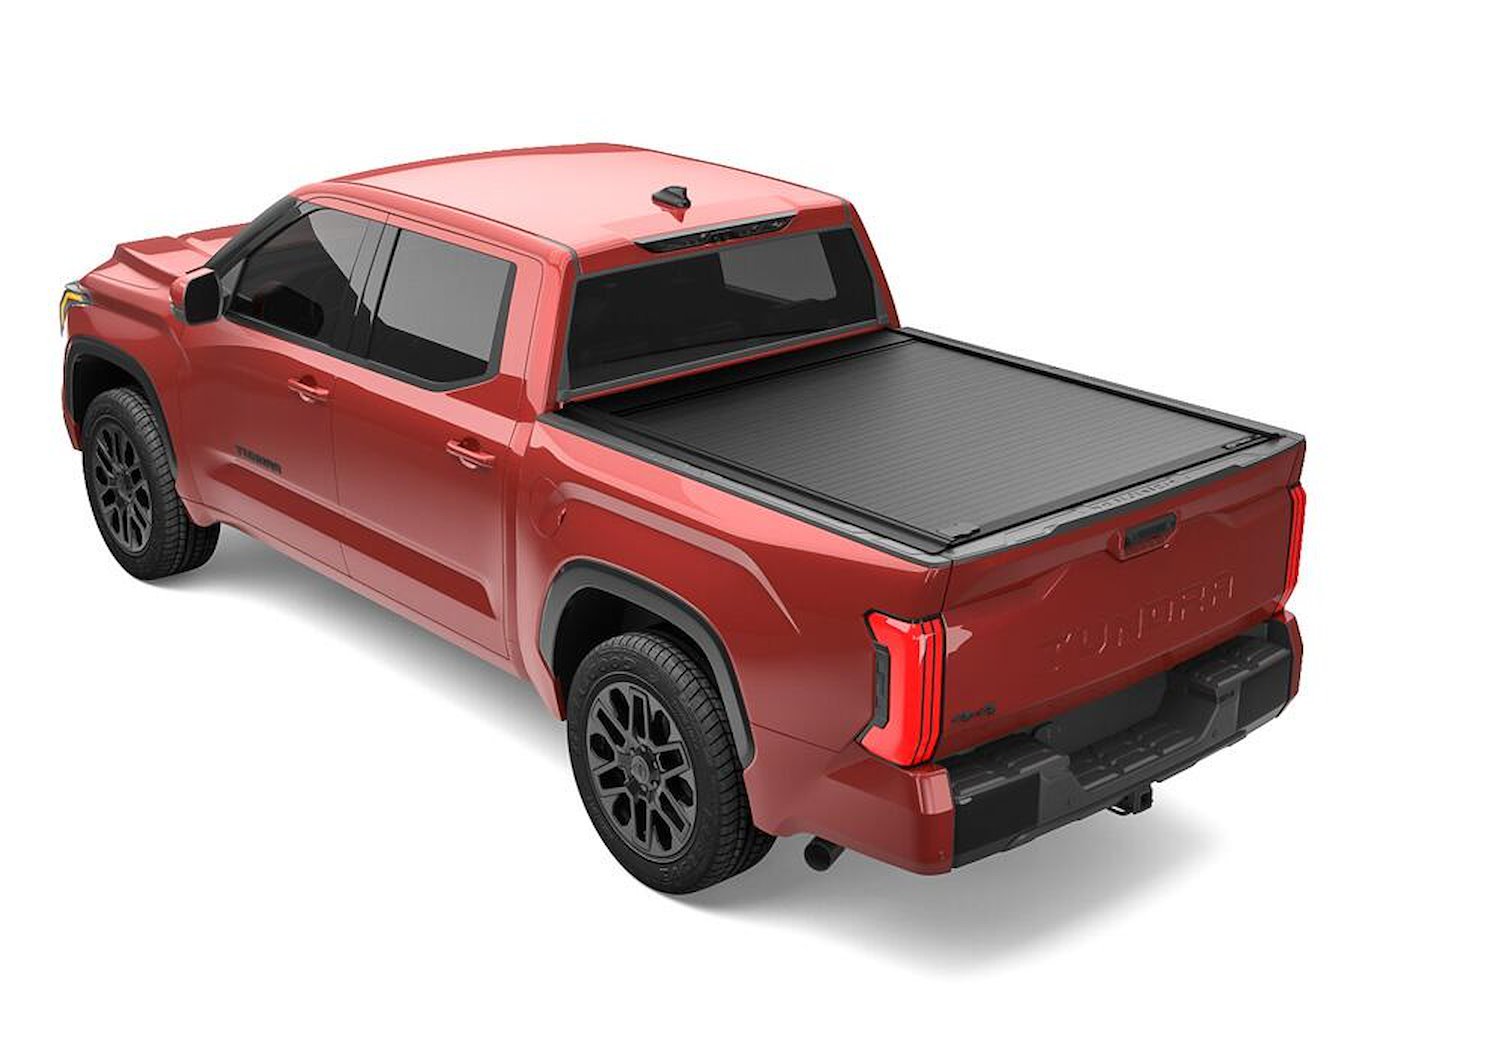 60861 RetraxOne MX Retractable Tonneau Cover Fits Select Toyota Tundra CrewMax 5' 7" Bed with Deck Rail System